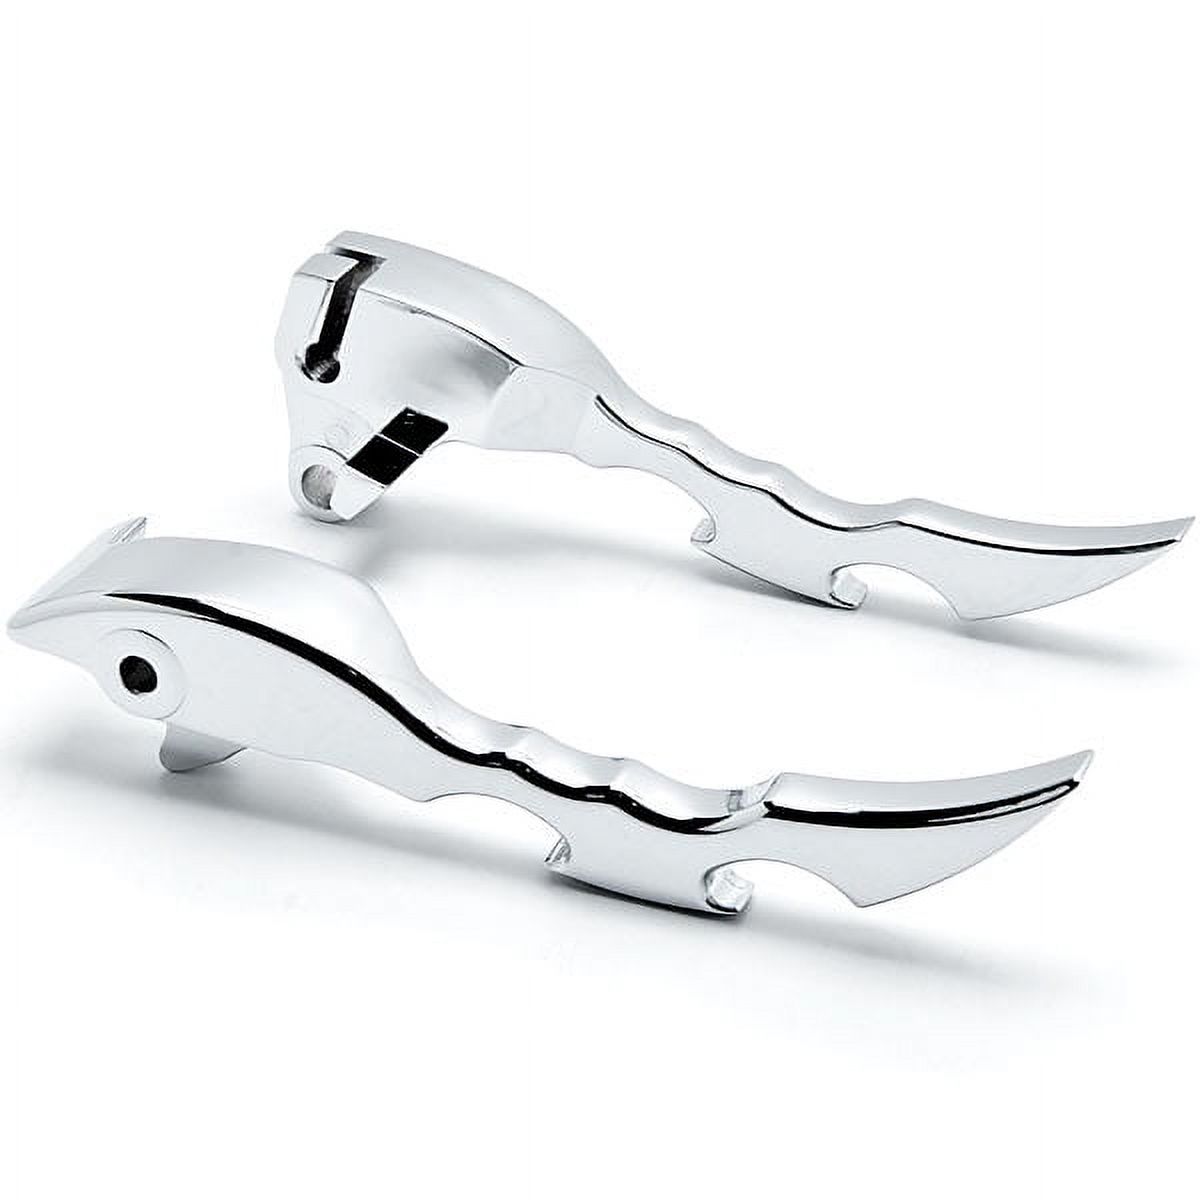 Krator Chrome Blade Brake Clutch Motorcycle Hand Levers Compatible with Suzuki Boulevard M109R 2009-2013 - image 1 of 3